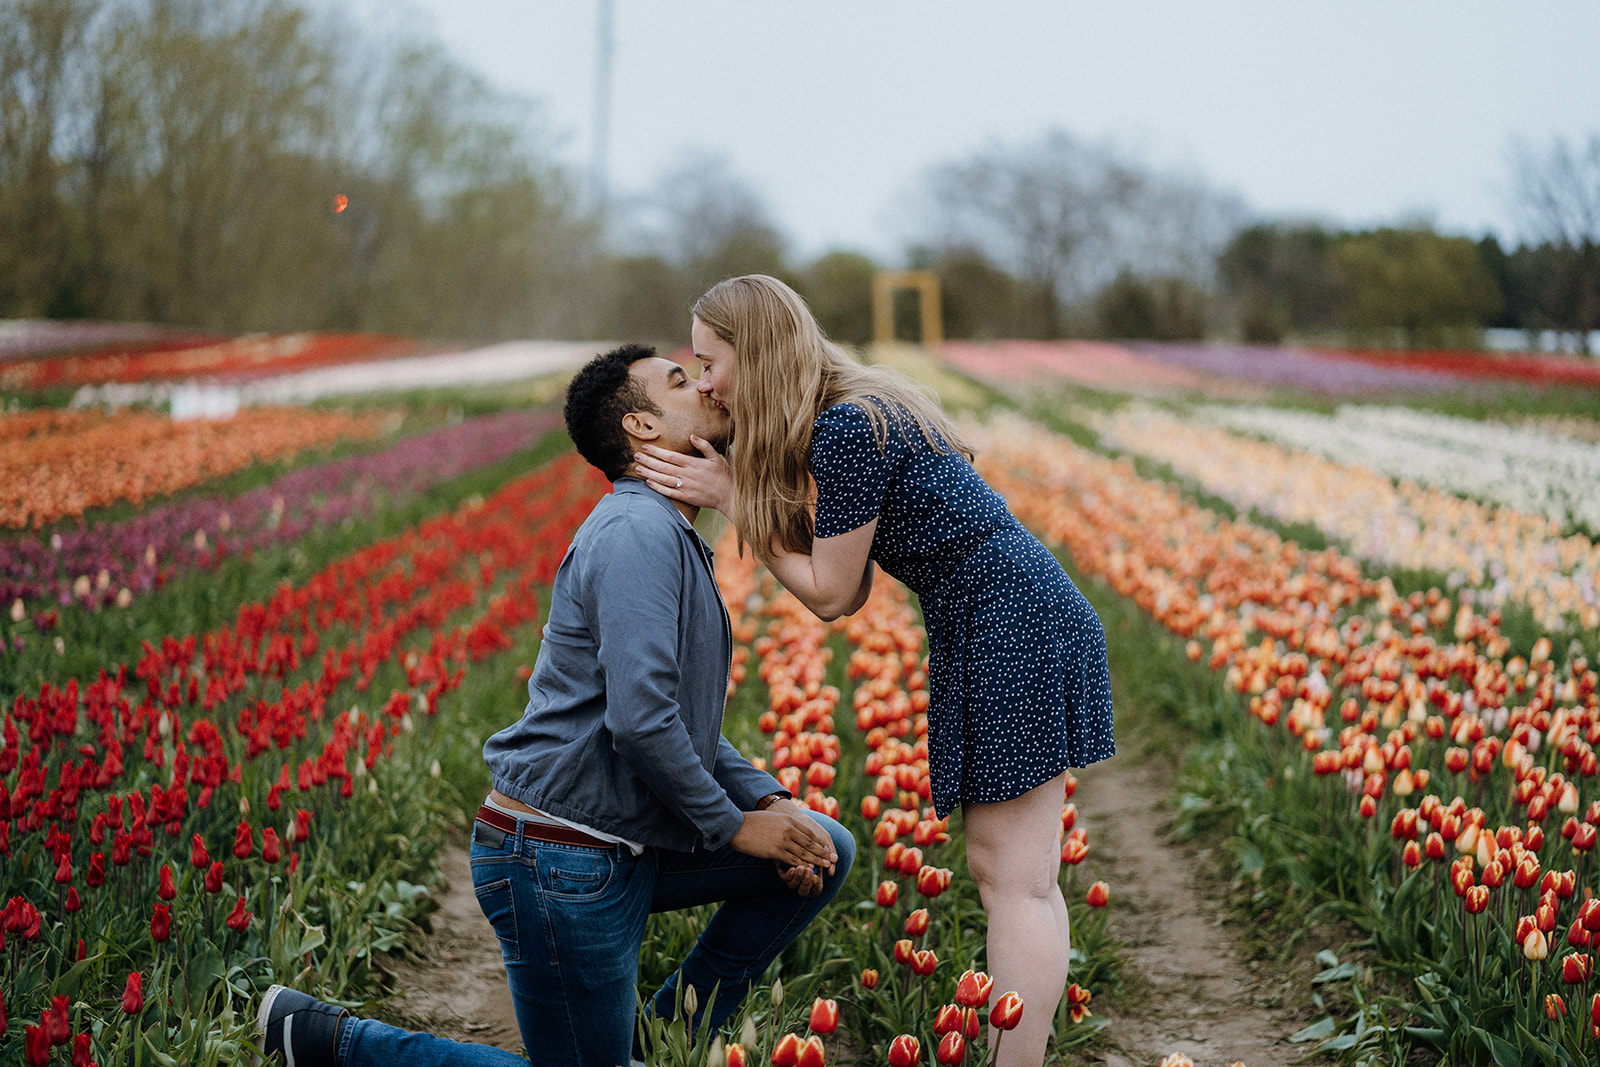 Man kneeling in tulips while his girlfriend bends down to kiss him.